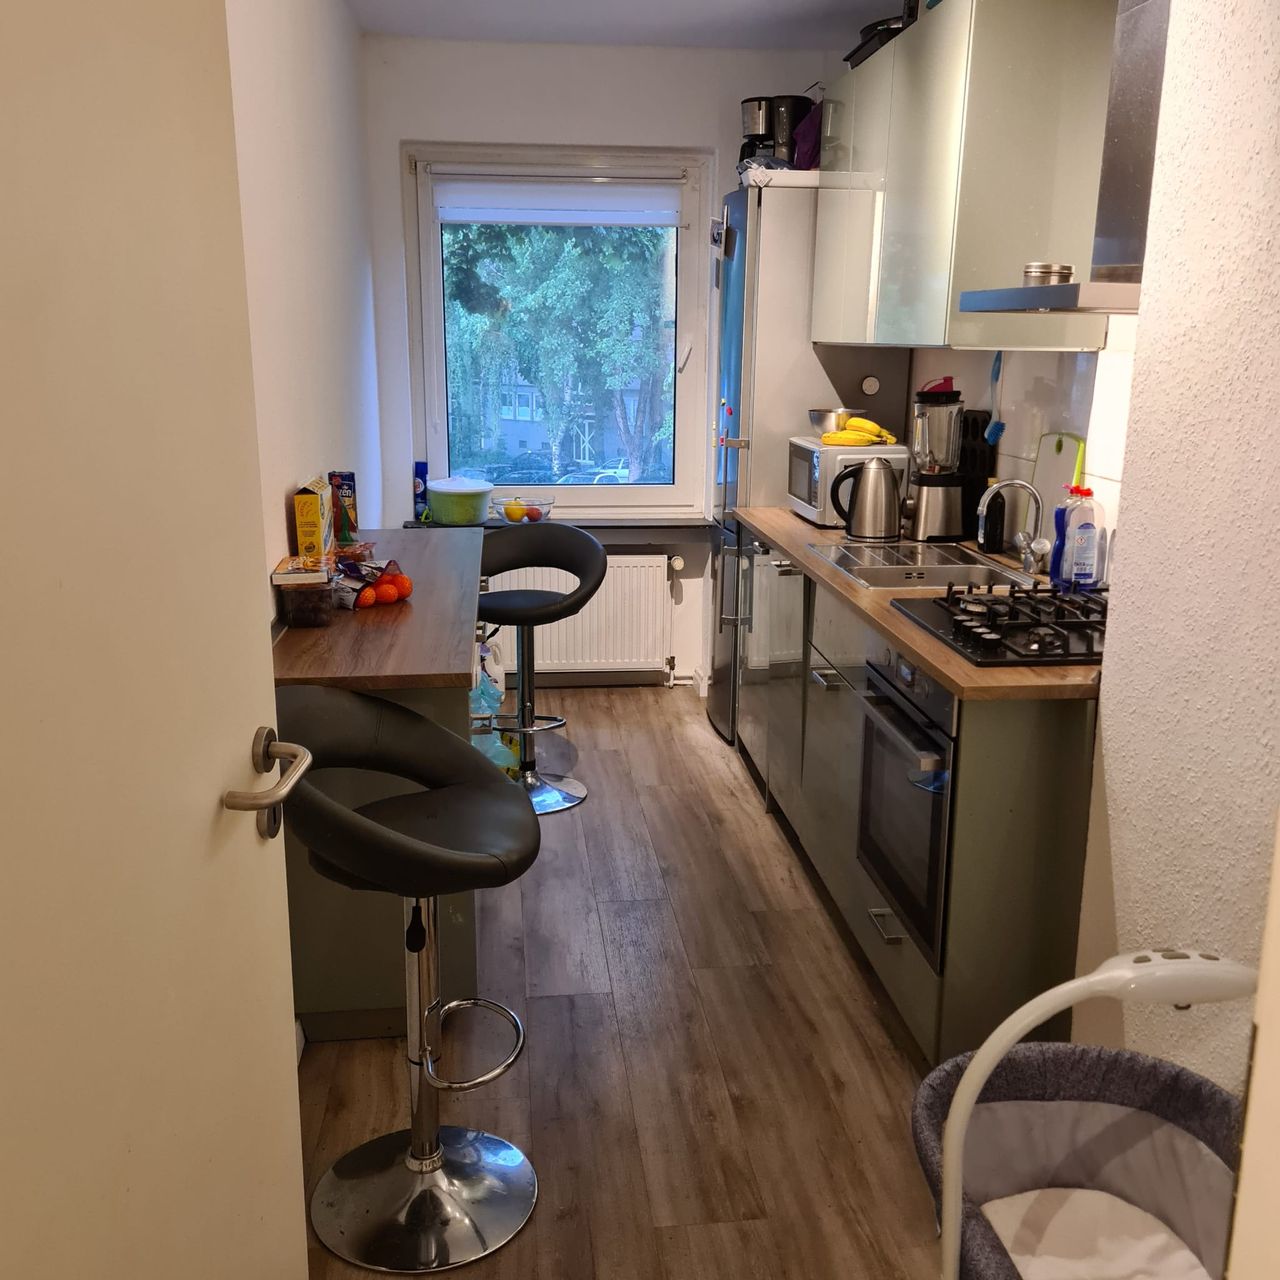 Stylish 3 room apartment in the clinic district - close to the center and still quiet